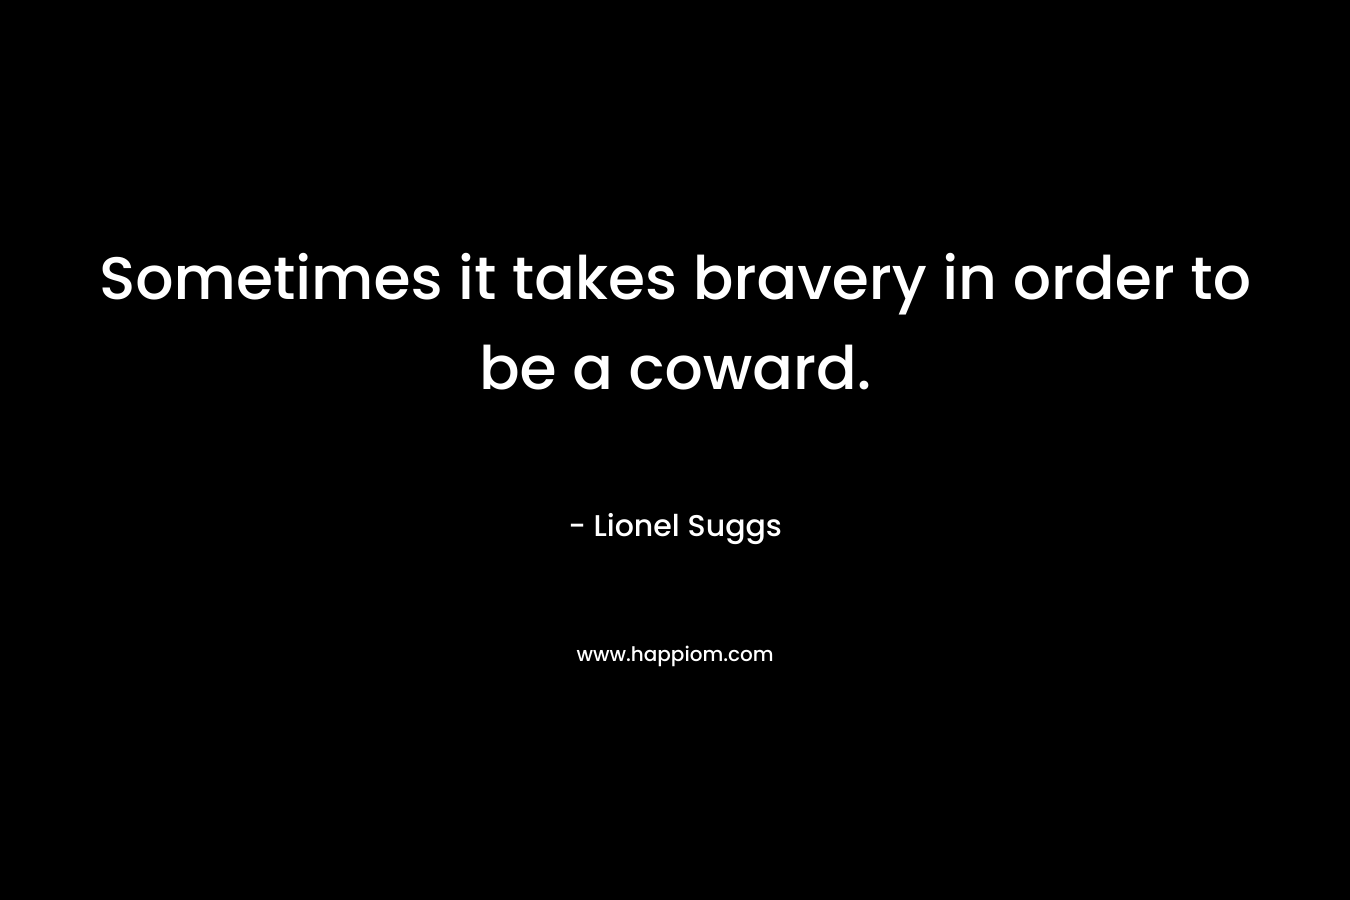 Sometimes it takes bravery in order to be a coward. – Lionel Suggs